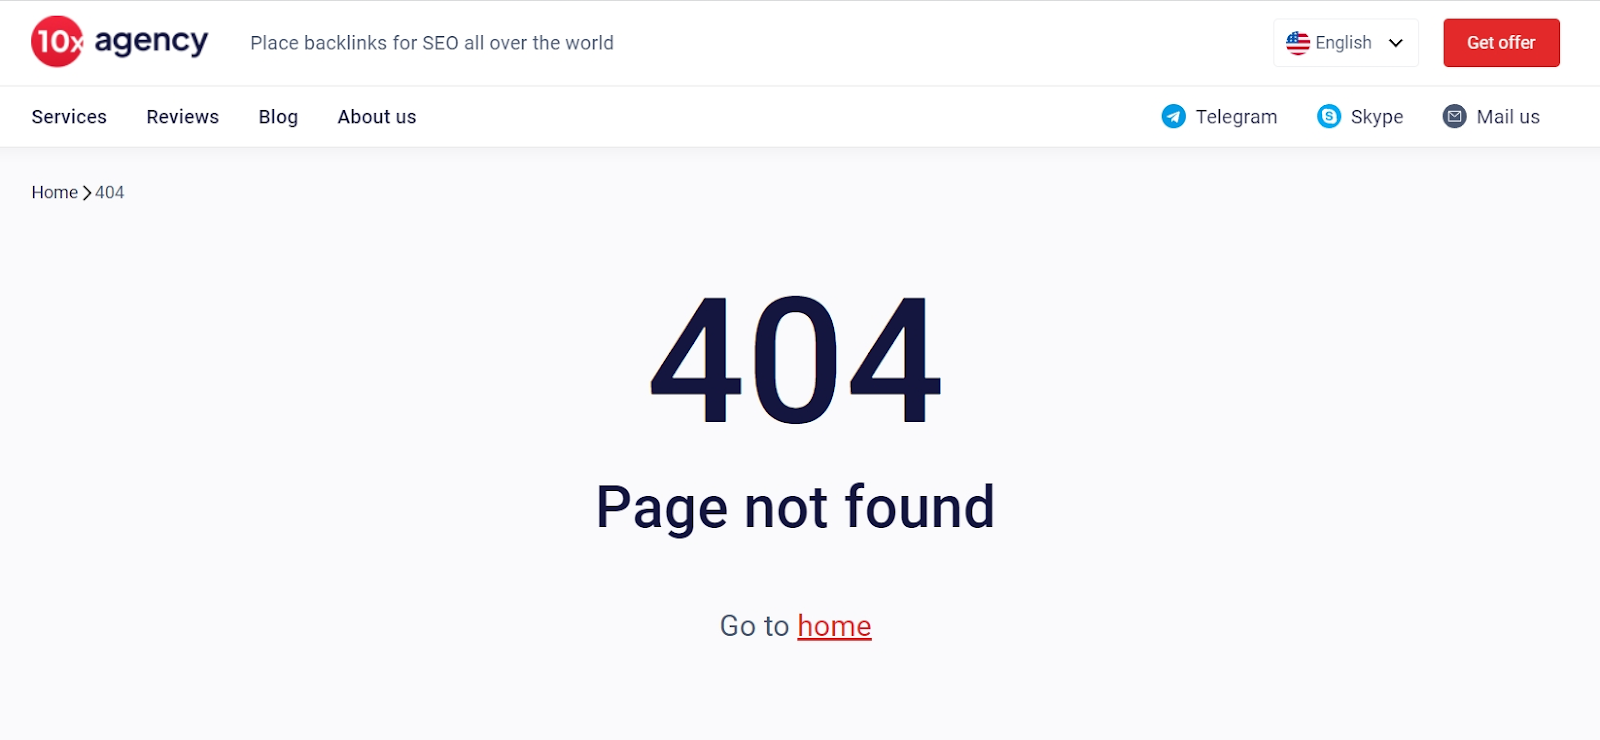 Page with "404 Not Found" status code